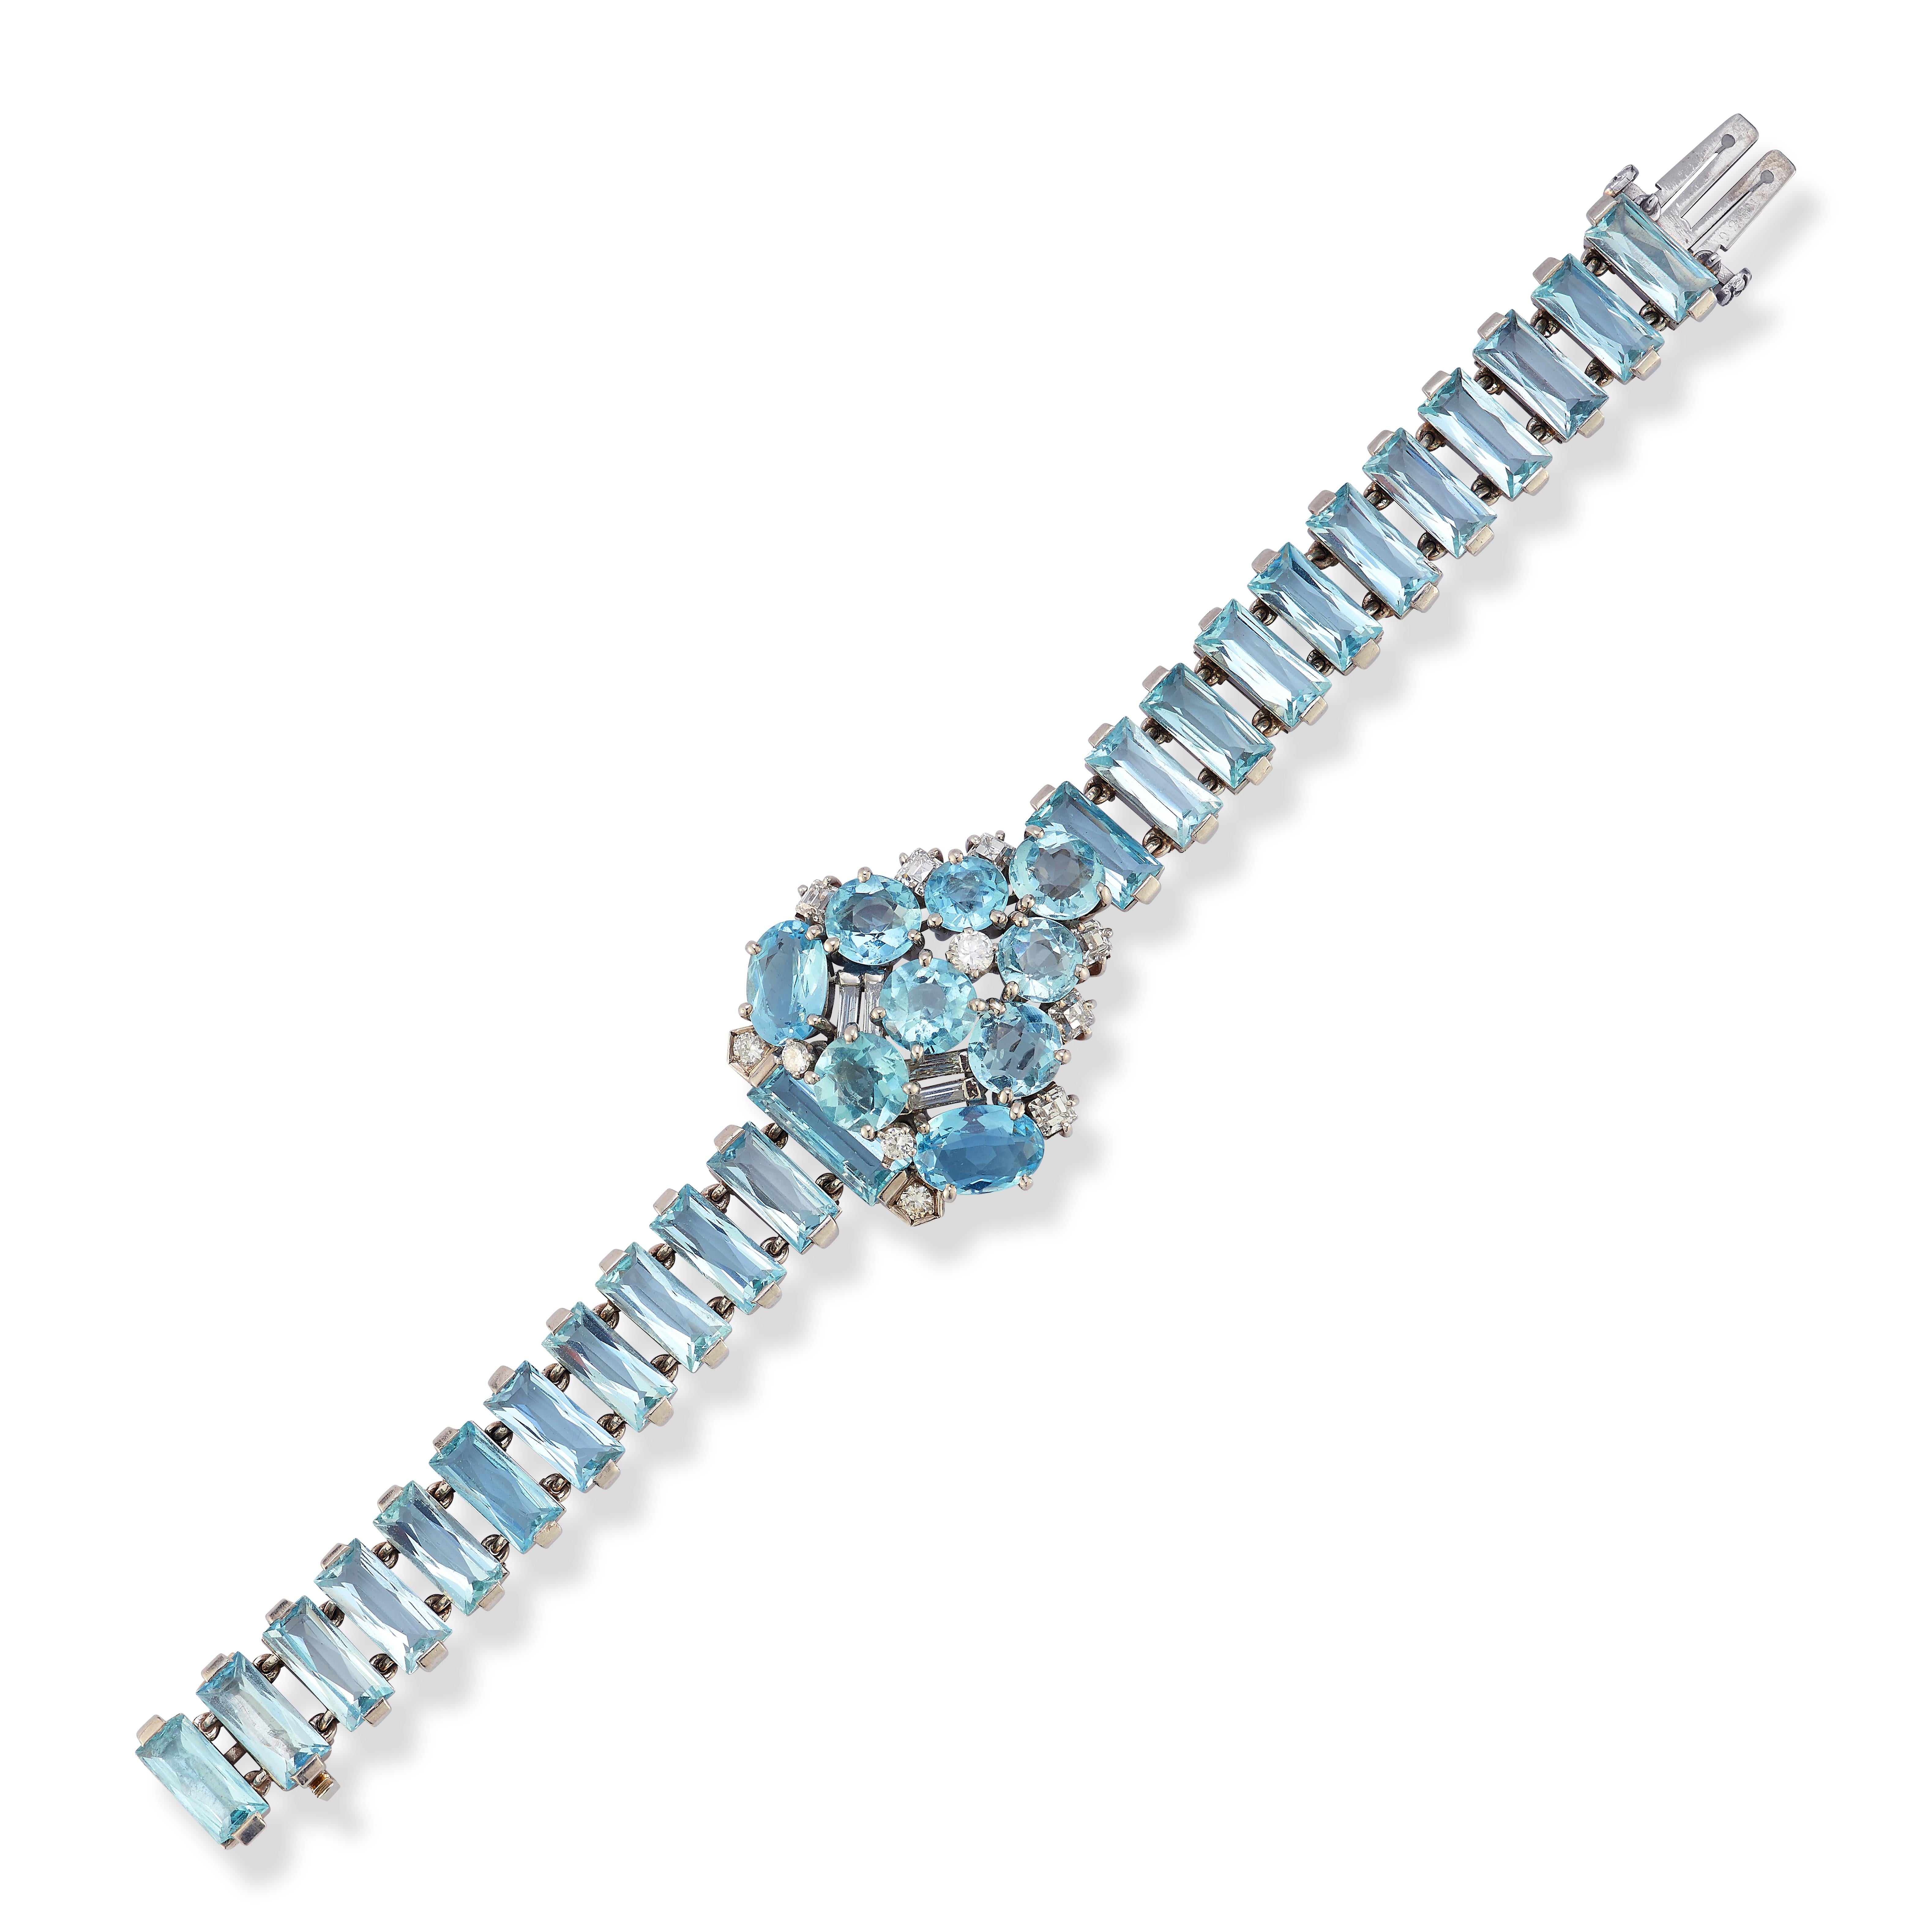 Cartier Aquamarine and Diamond Bracelet. Circa 1939

A bracelet with a central shield-shaped panel featuring one rectangular-cut, two oval, and seven round aquamarines, along with six square step-cut and 22 rectangular scissor-cut aquamarines,